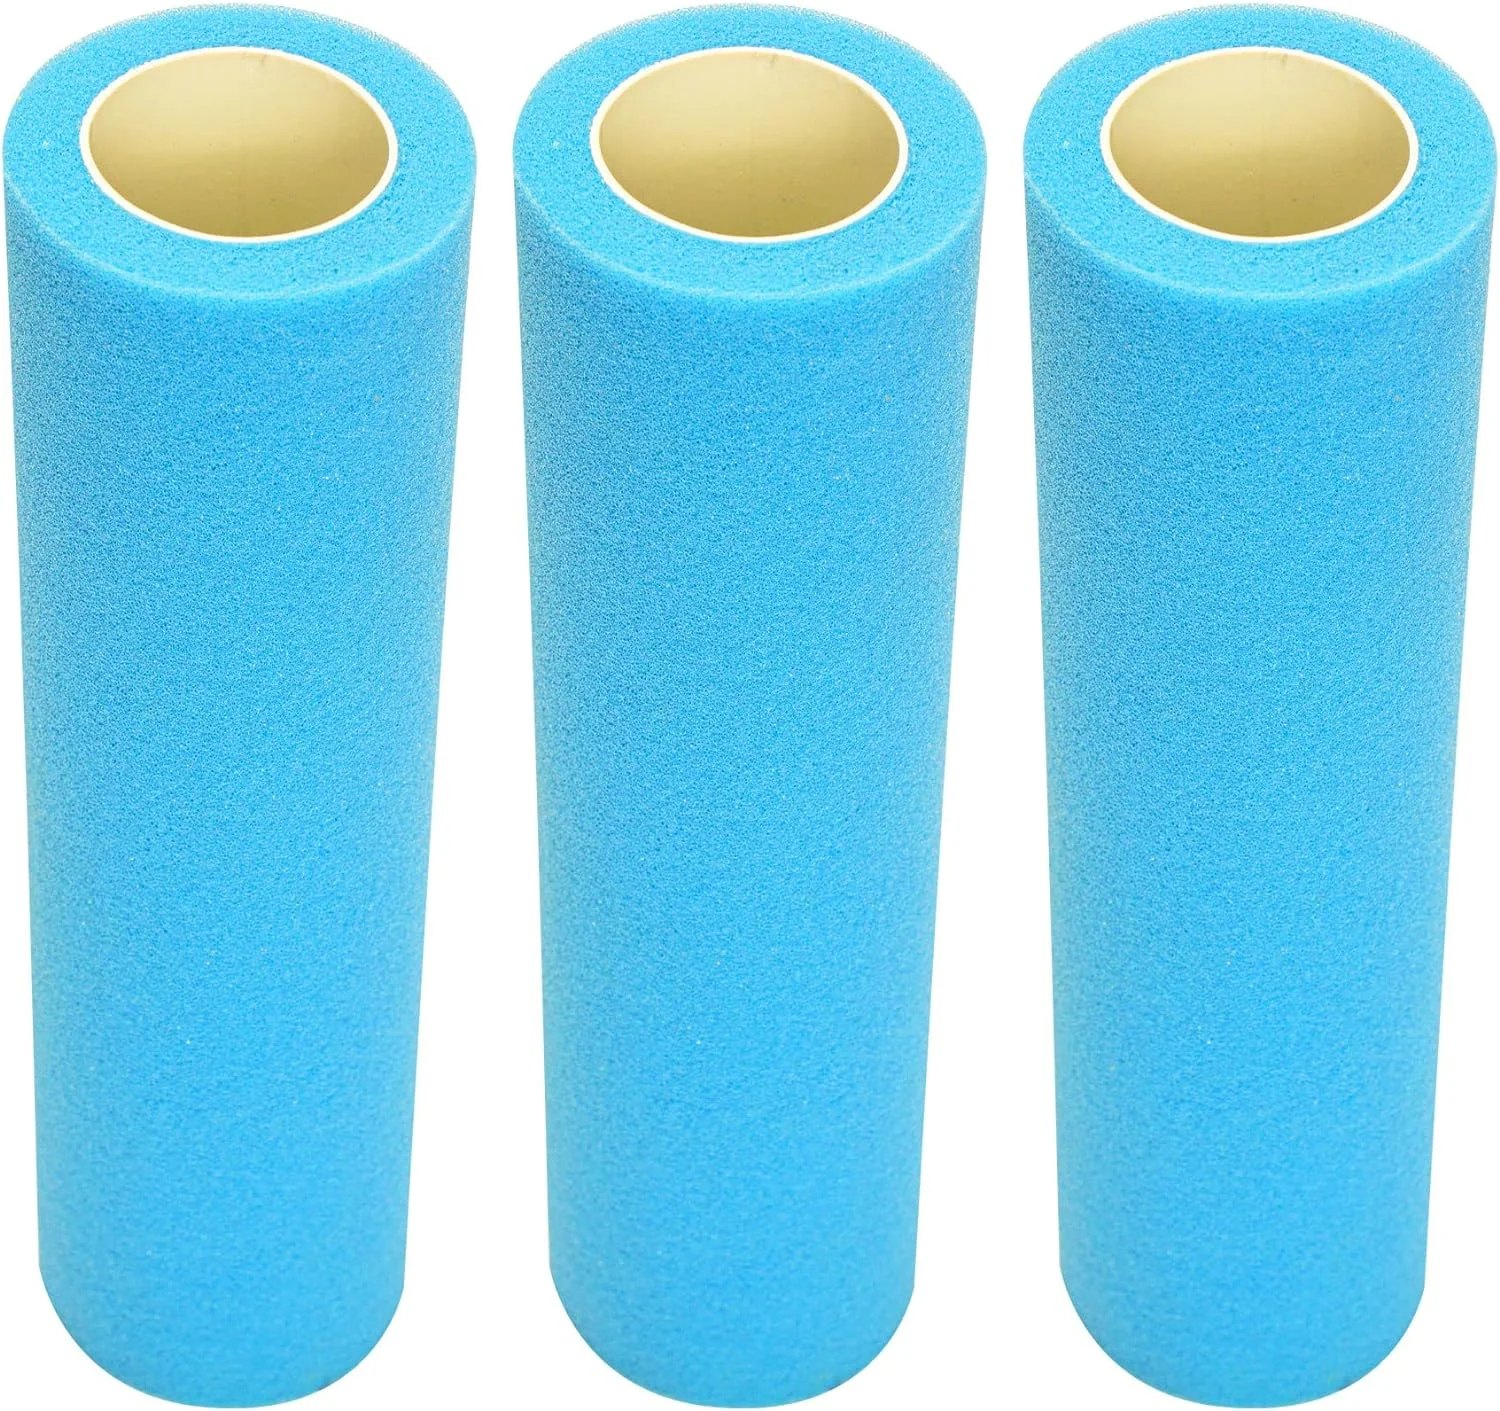 Voomey 9 Inch Foam Paint Roller, High Density Foam Roller Paint,Paint Rollers for Painting Walls,3 Pack,for Painting Houses or Furniture, Etc.